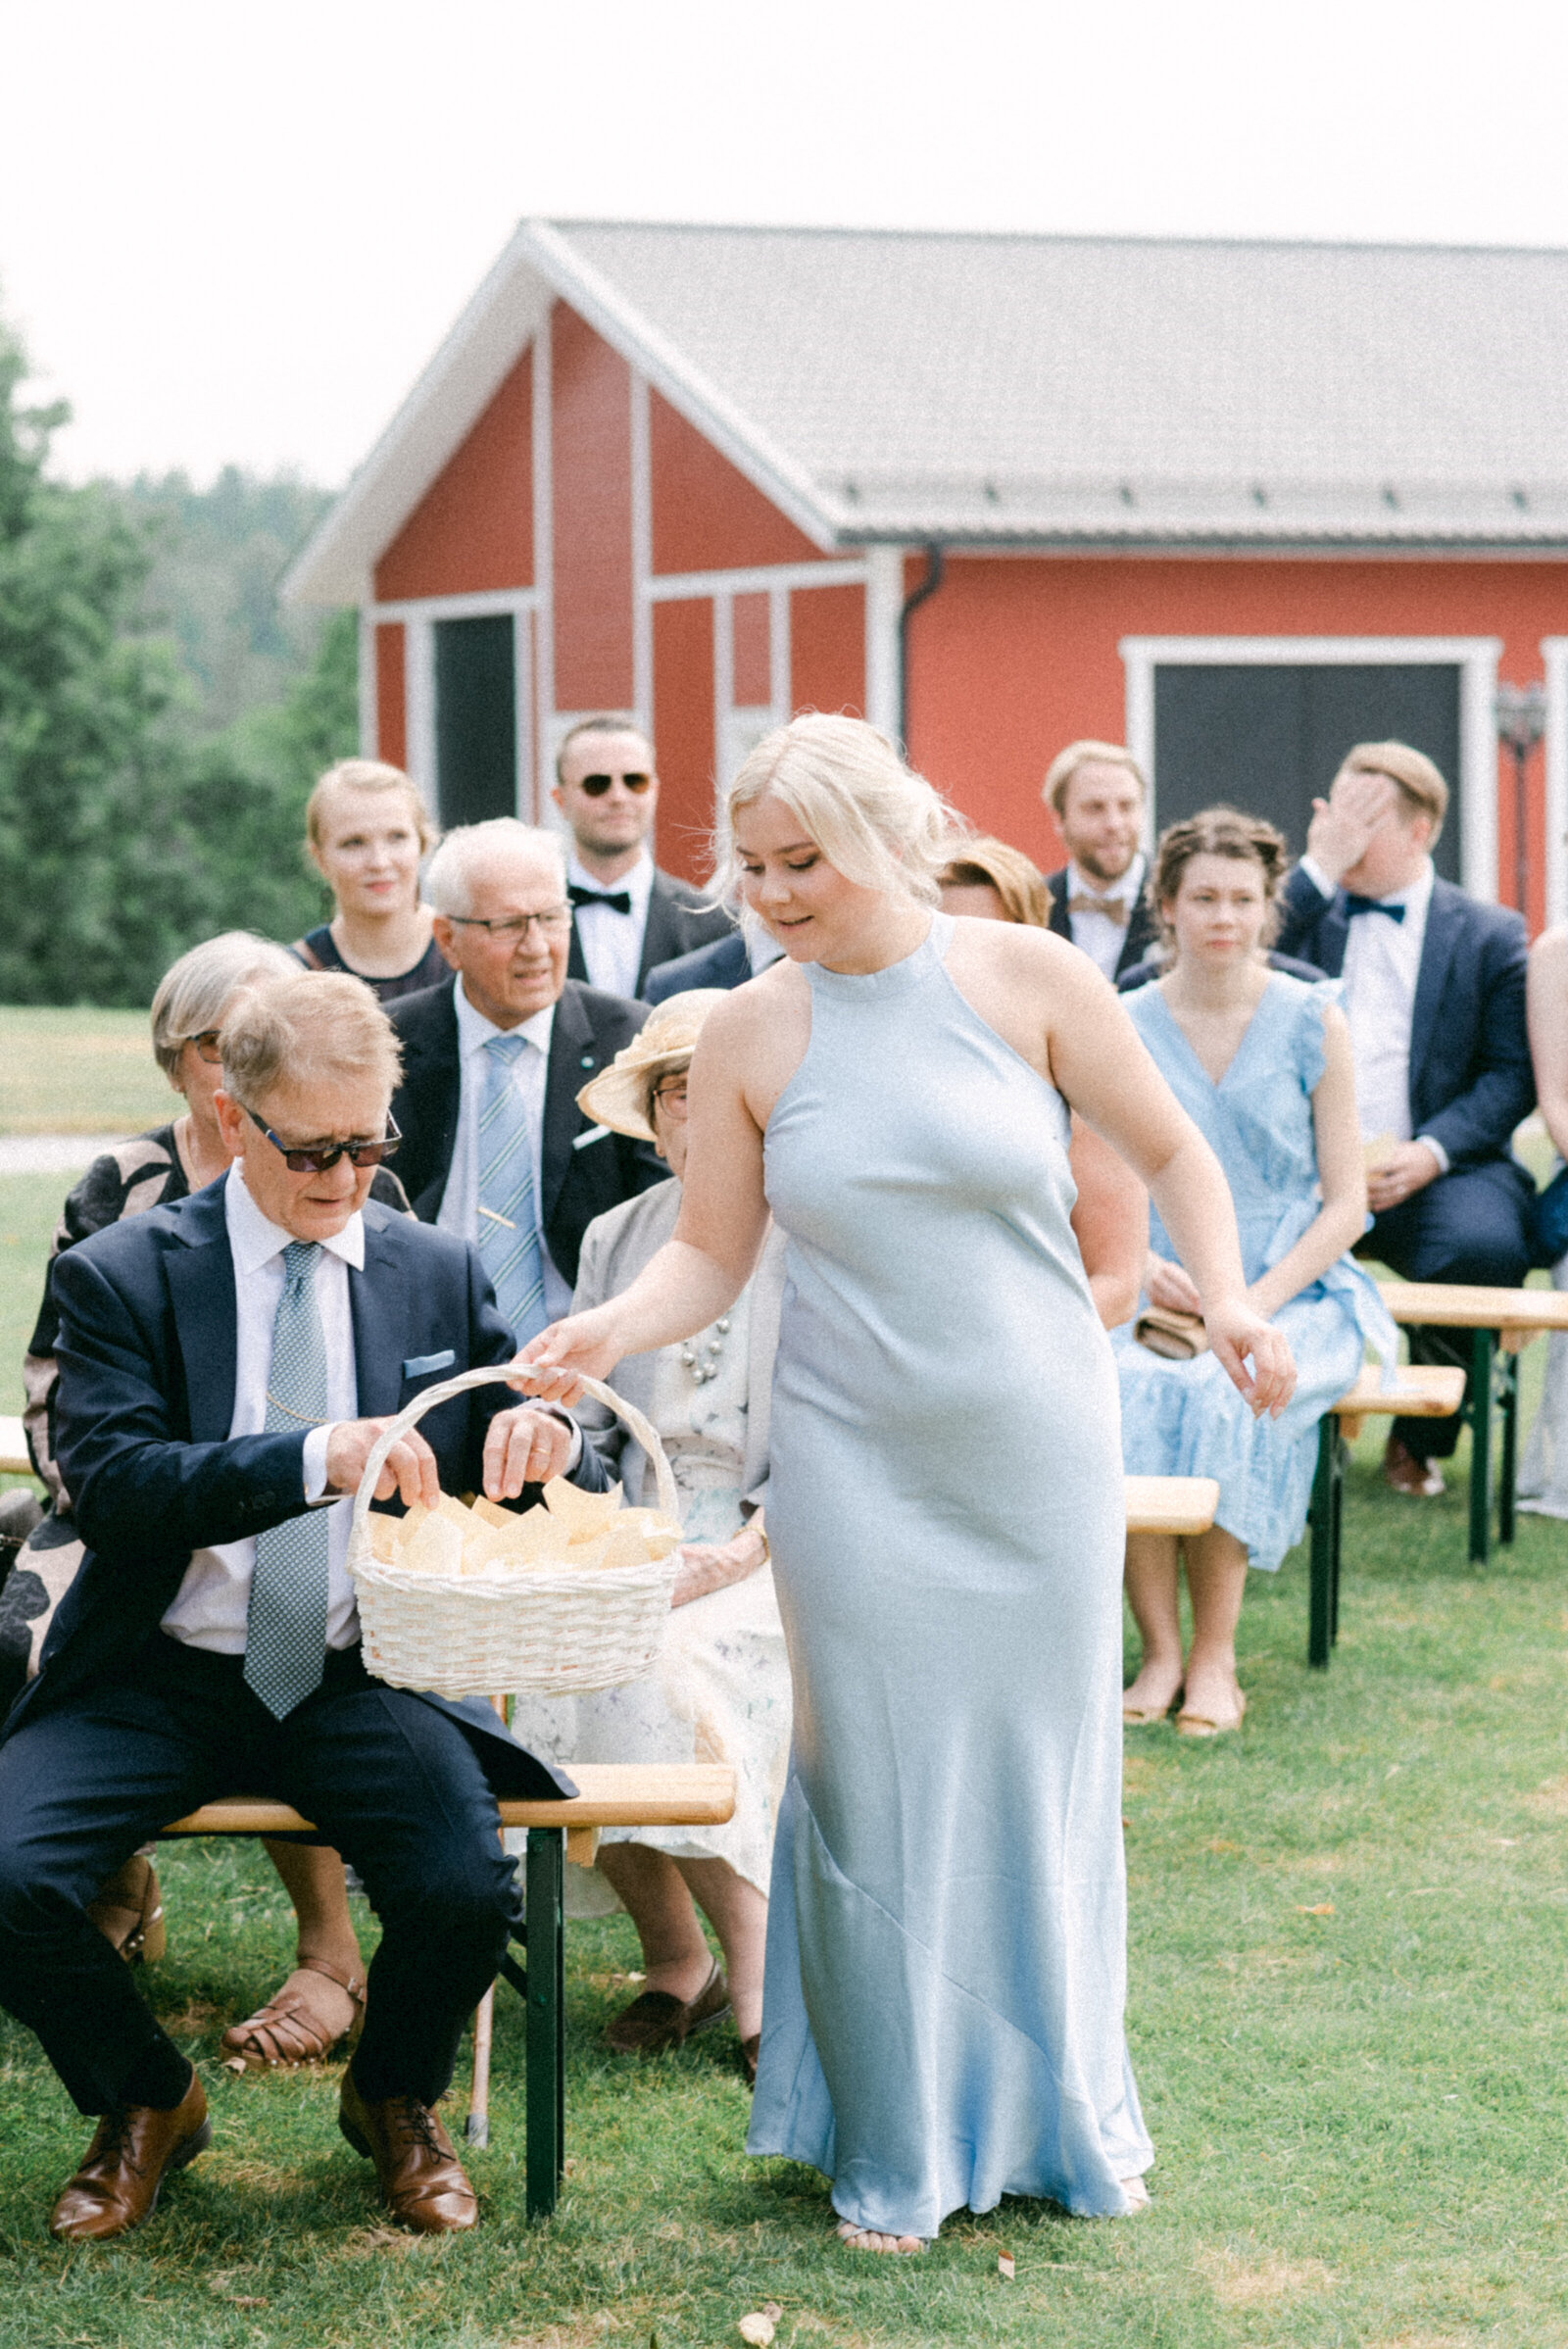 Bridesmaid sharing rose petals to guests photographed by wedding photographer Hannika Gabrielsson.